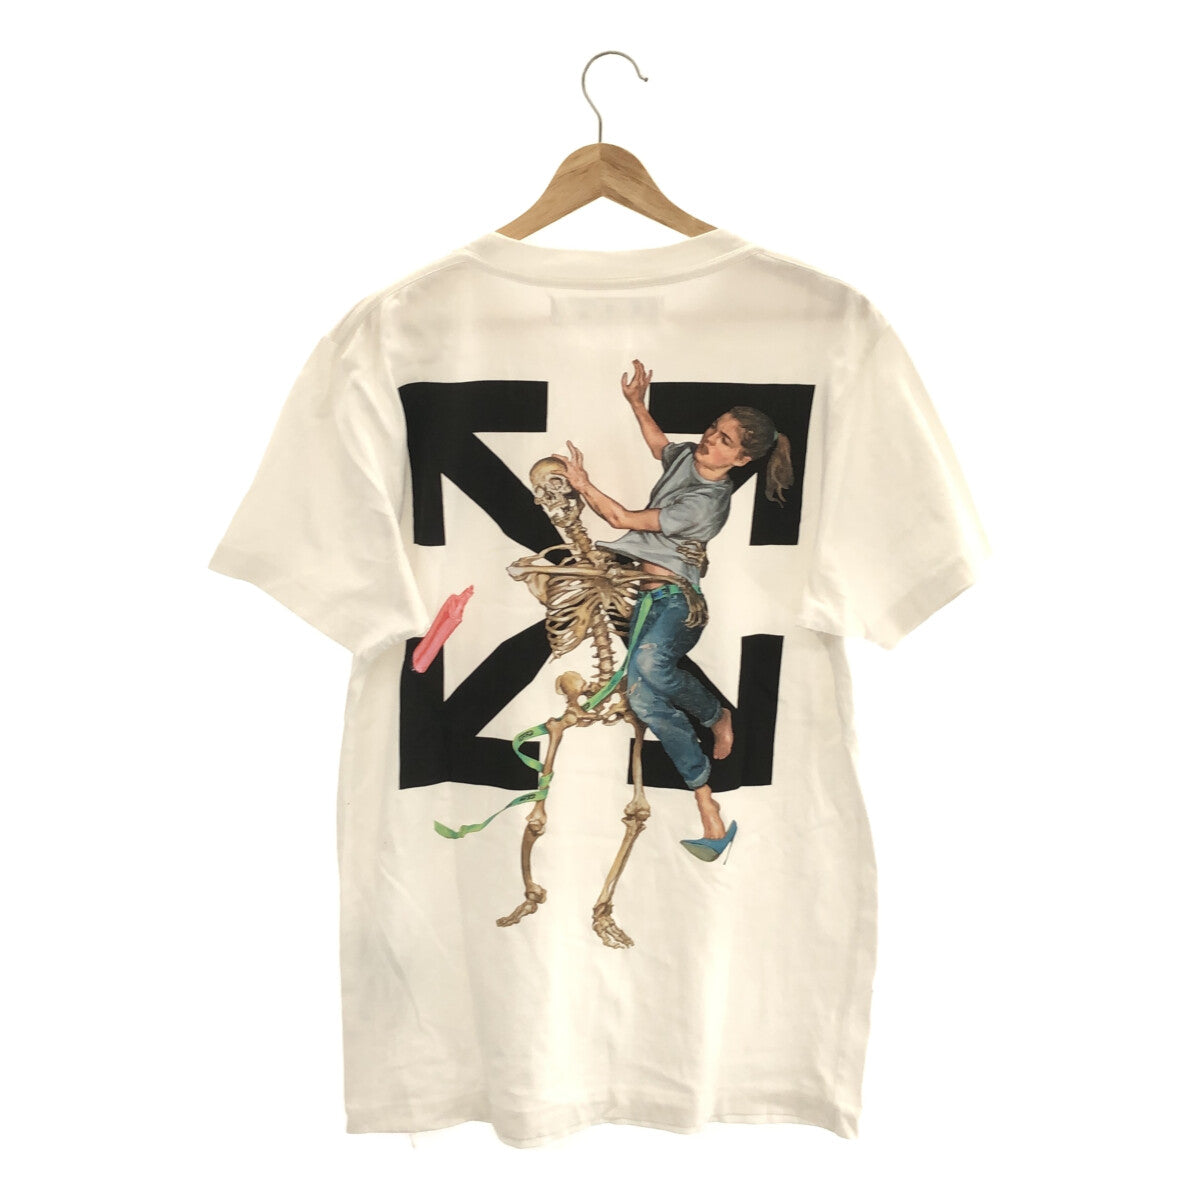 Off-White / オフホワイト | 2020AW | PASCAL PRINT S/S TEE / スケルトン 両面プリント Tシャツ | M |